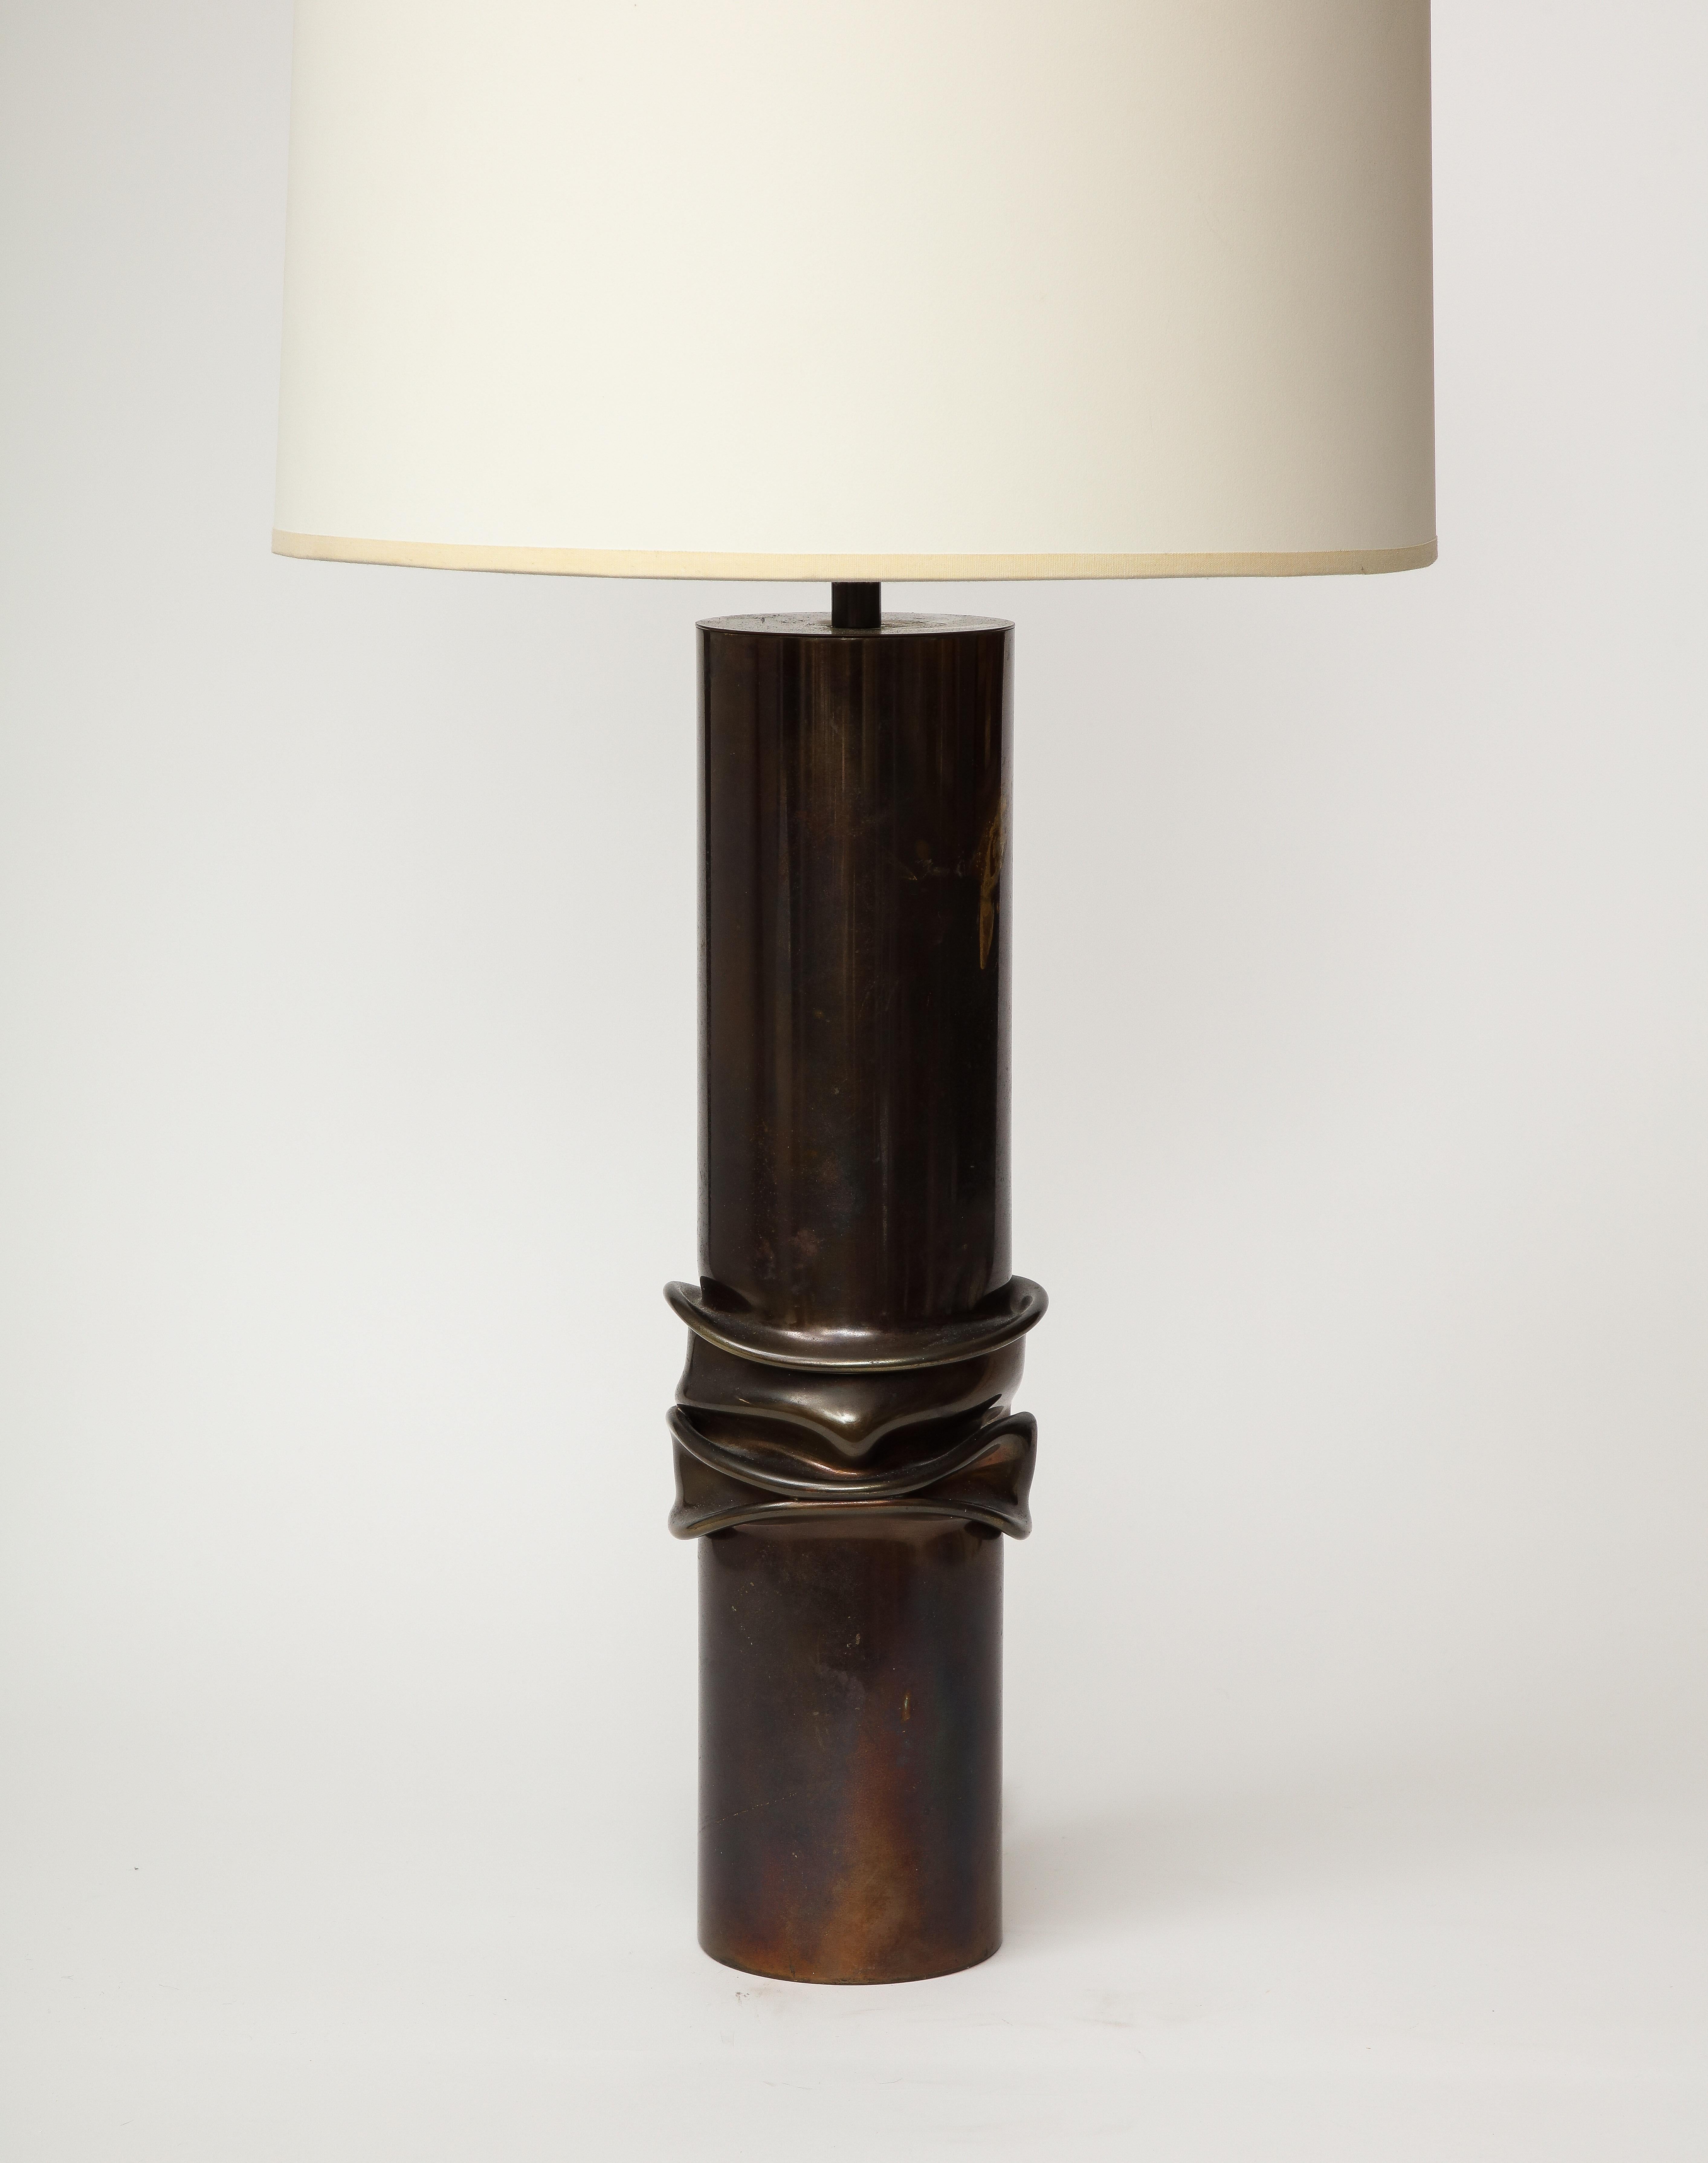 French Steel Table Lamp by Jacques Moniquet, France, c. 1960